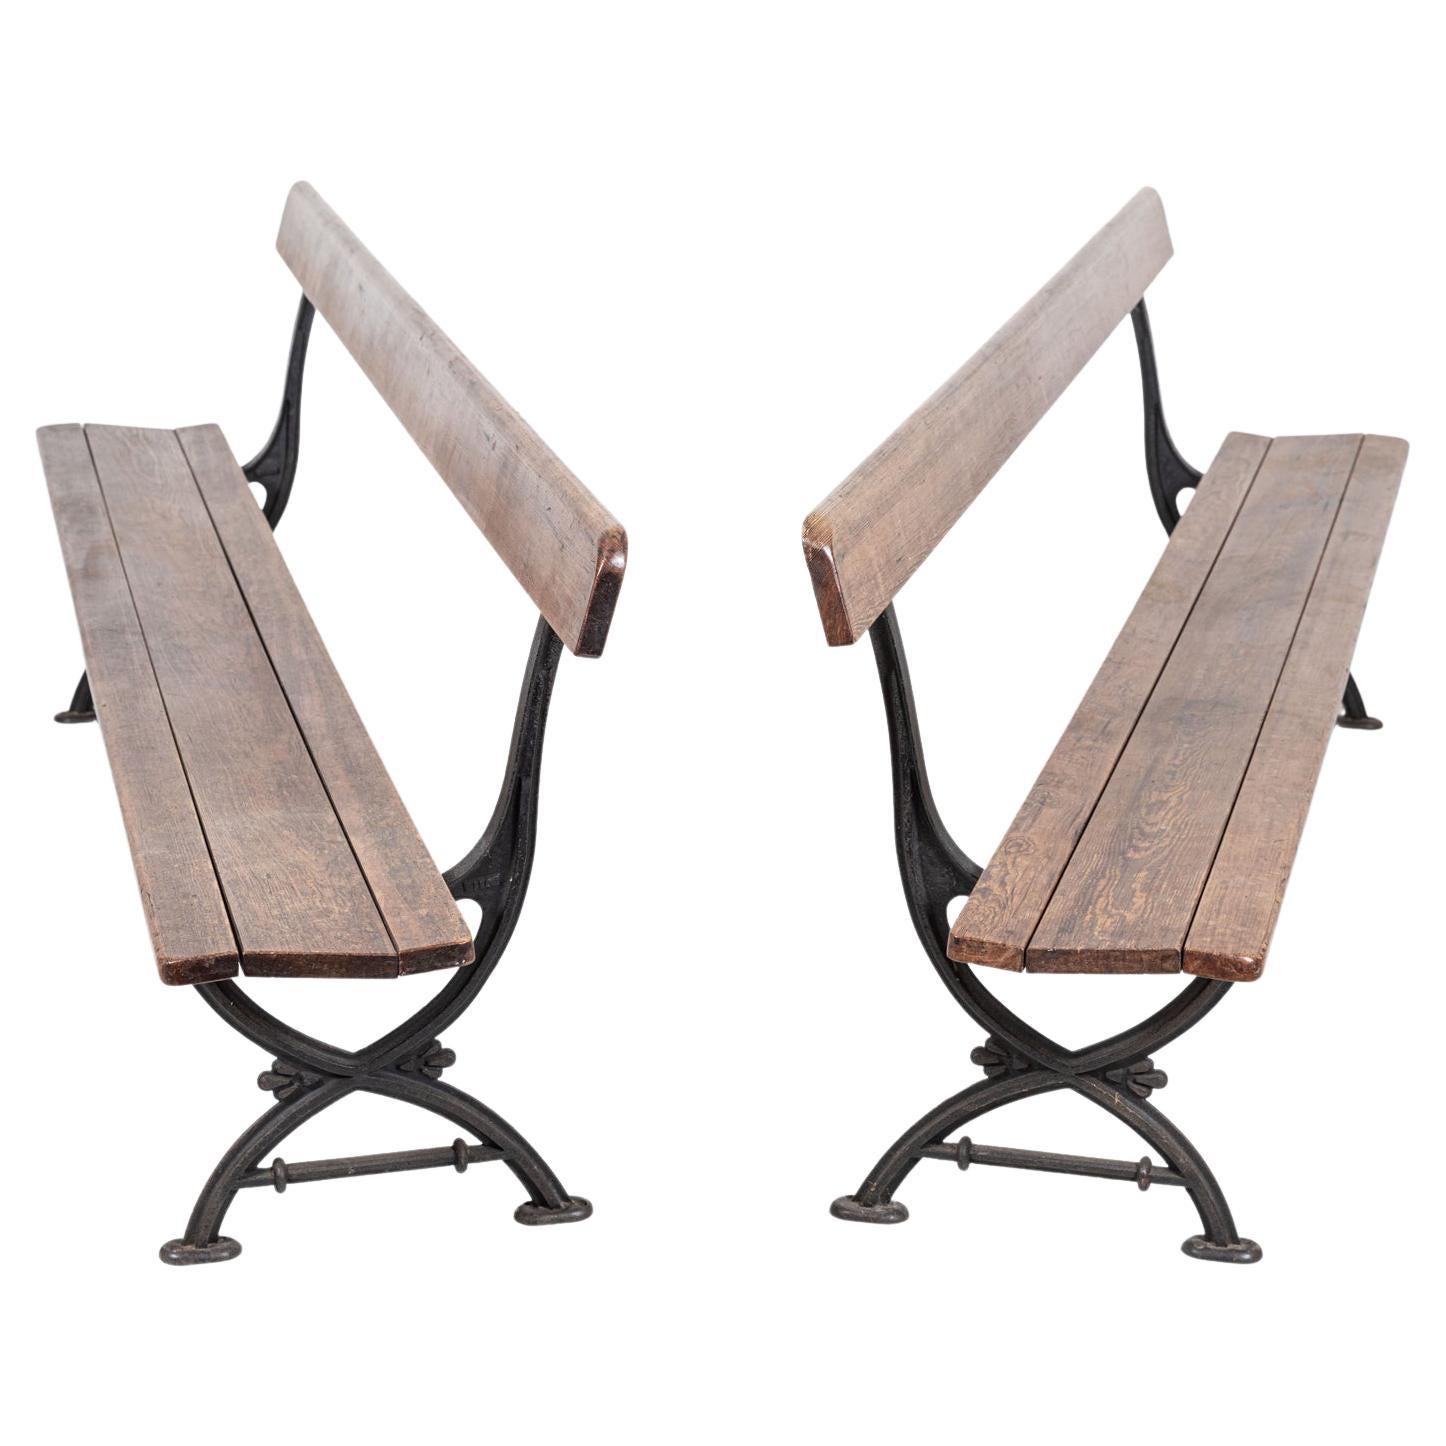 Pair 19thC English Cast Iron Pitch Pine Benches For Sale